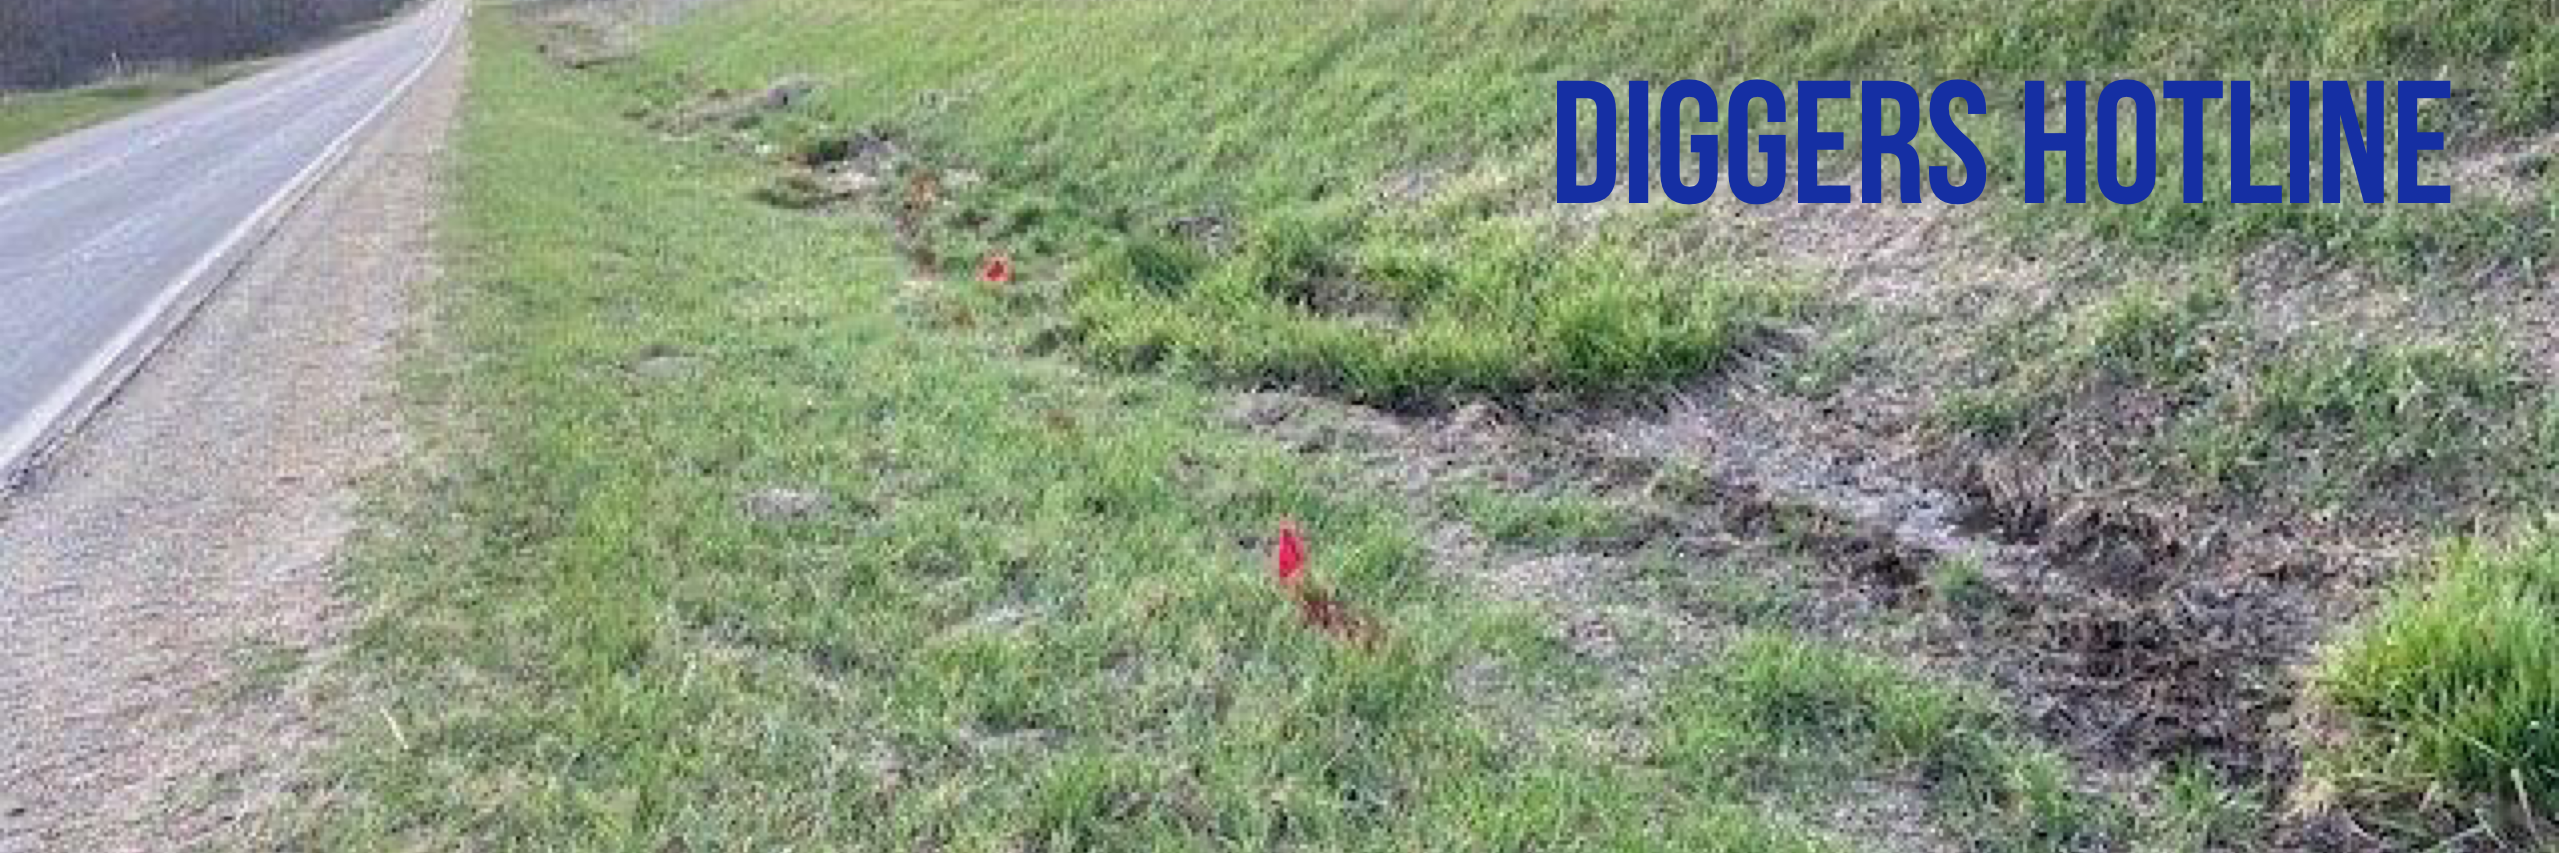 Diggers Web Banner.png